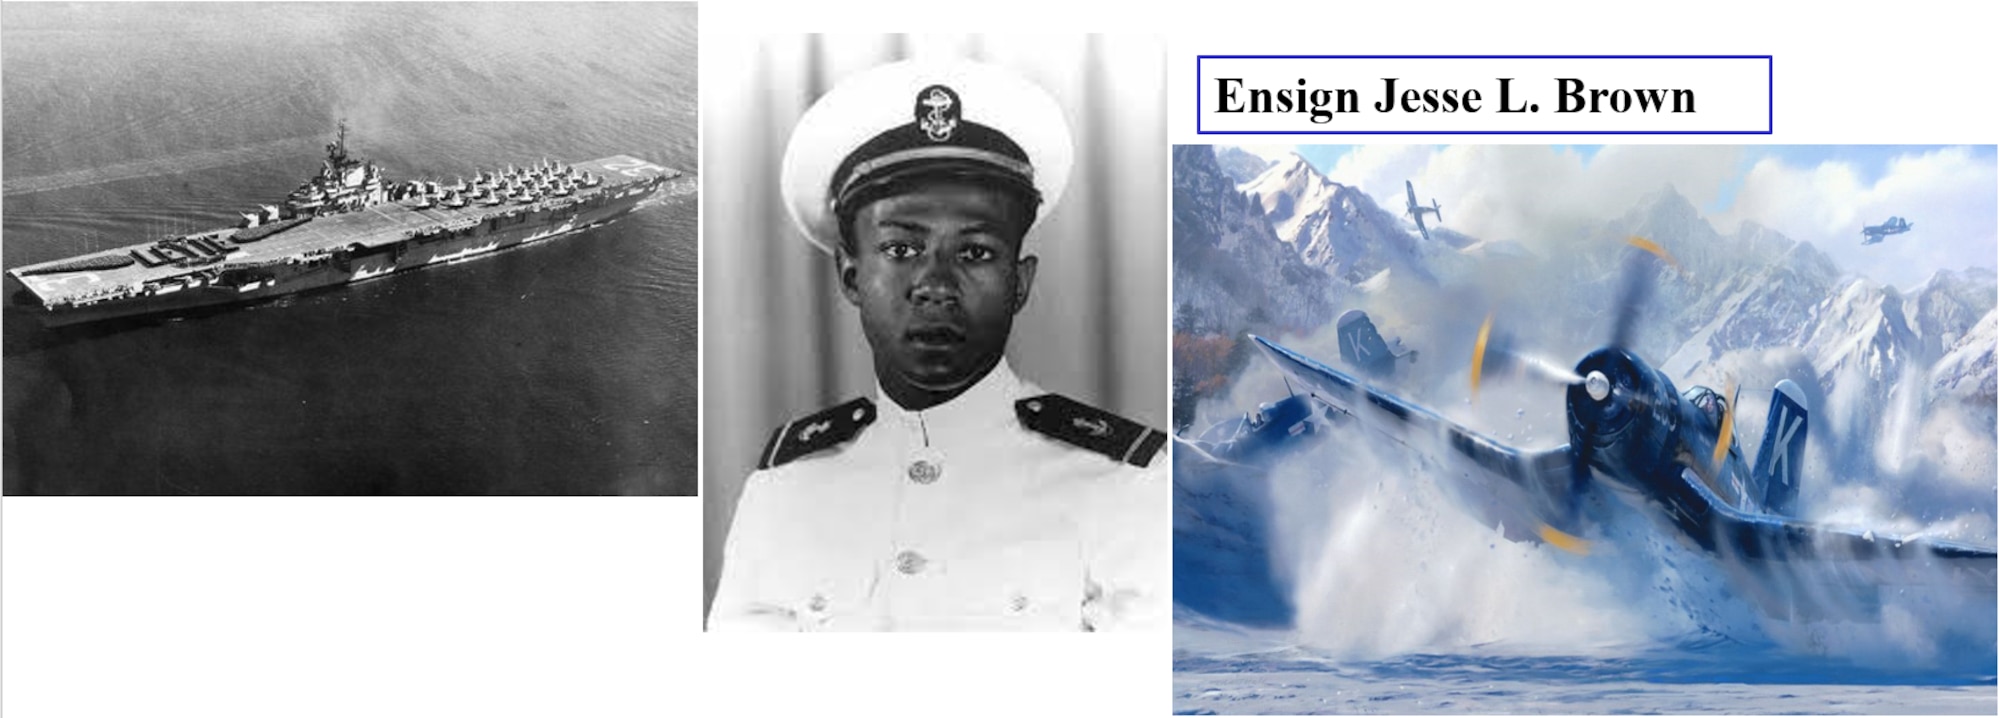 Courtesy photo collage of Ensign Jesse L. Brown.